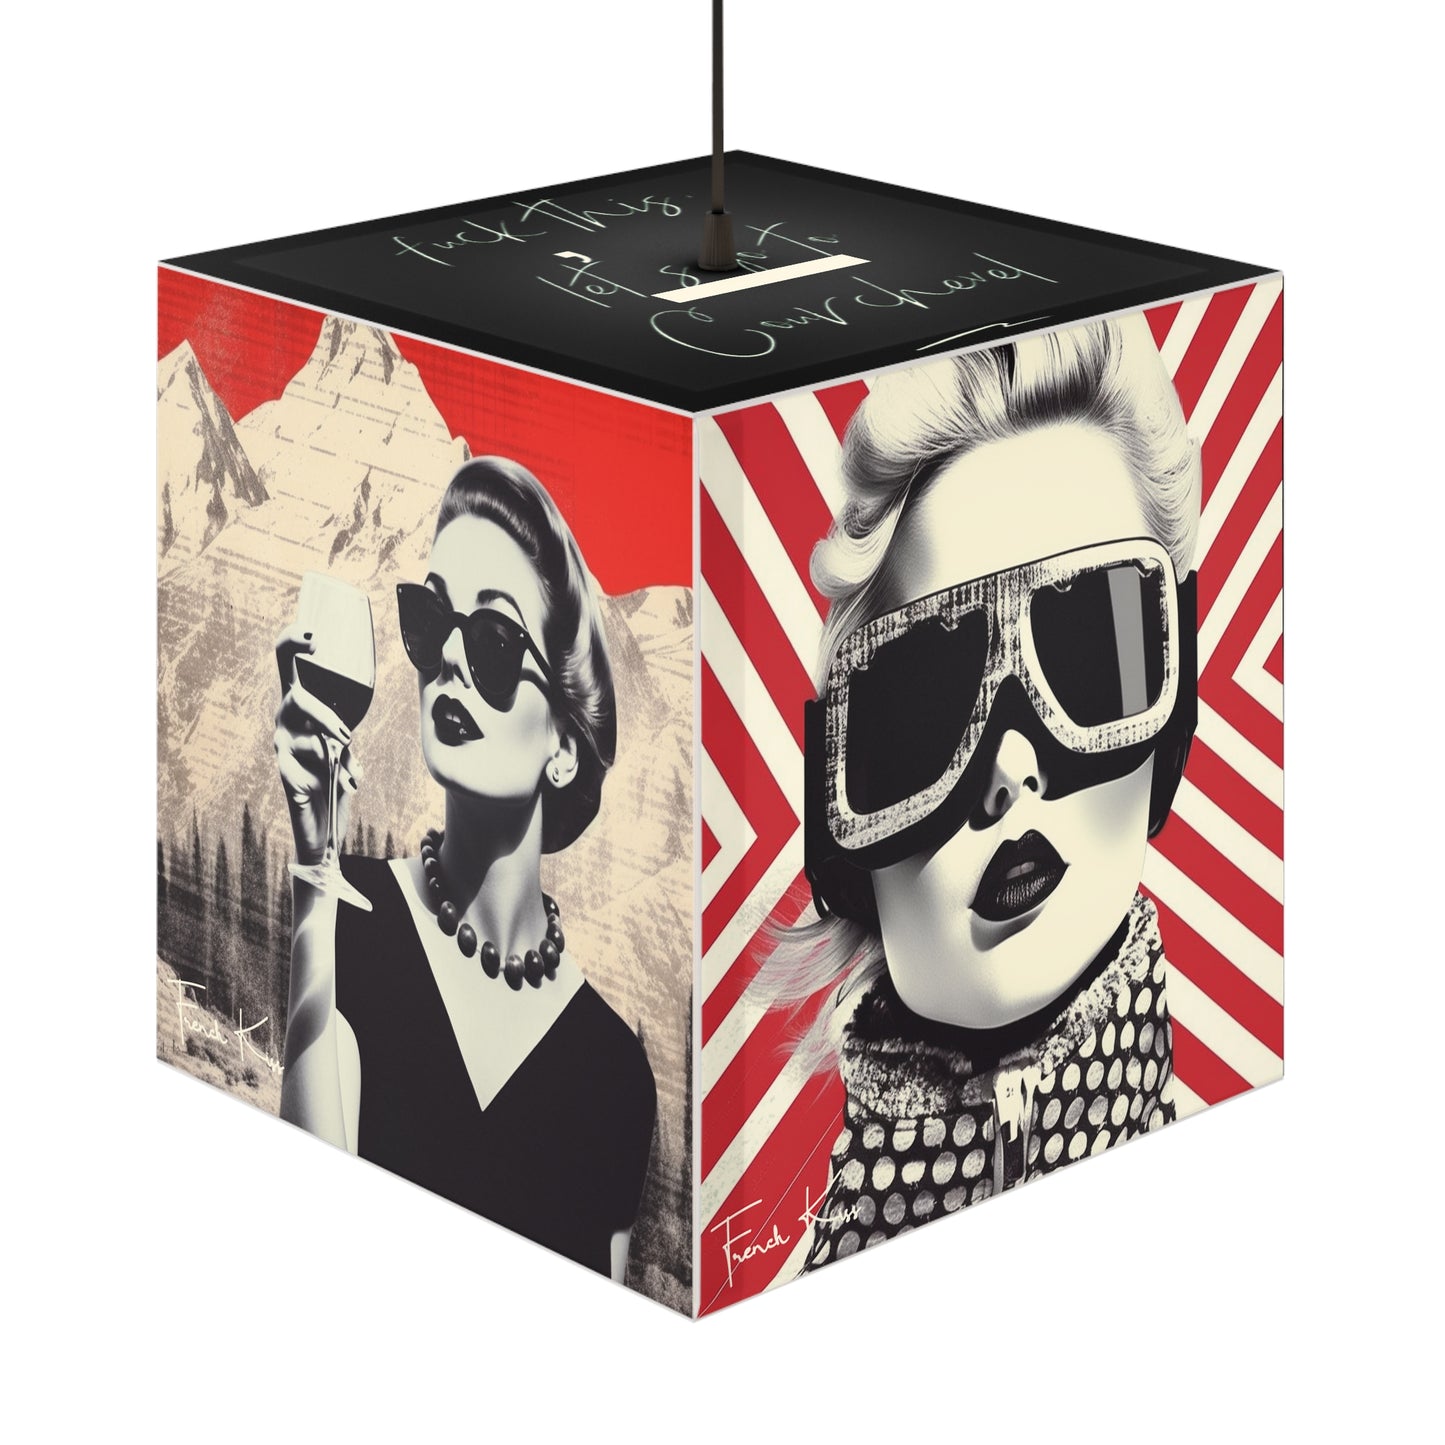 APRES SKI Sexy Chic Light Cube Lamp, French Kiss Glamour Lifestyle Fashion Haute Couture Travel Pop Art Interior Designer Luxe Luxury